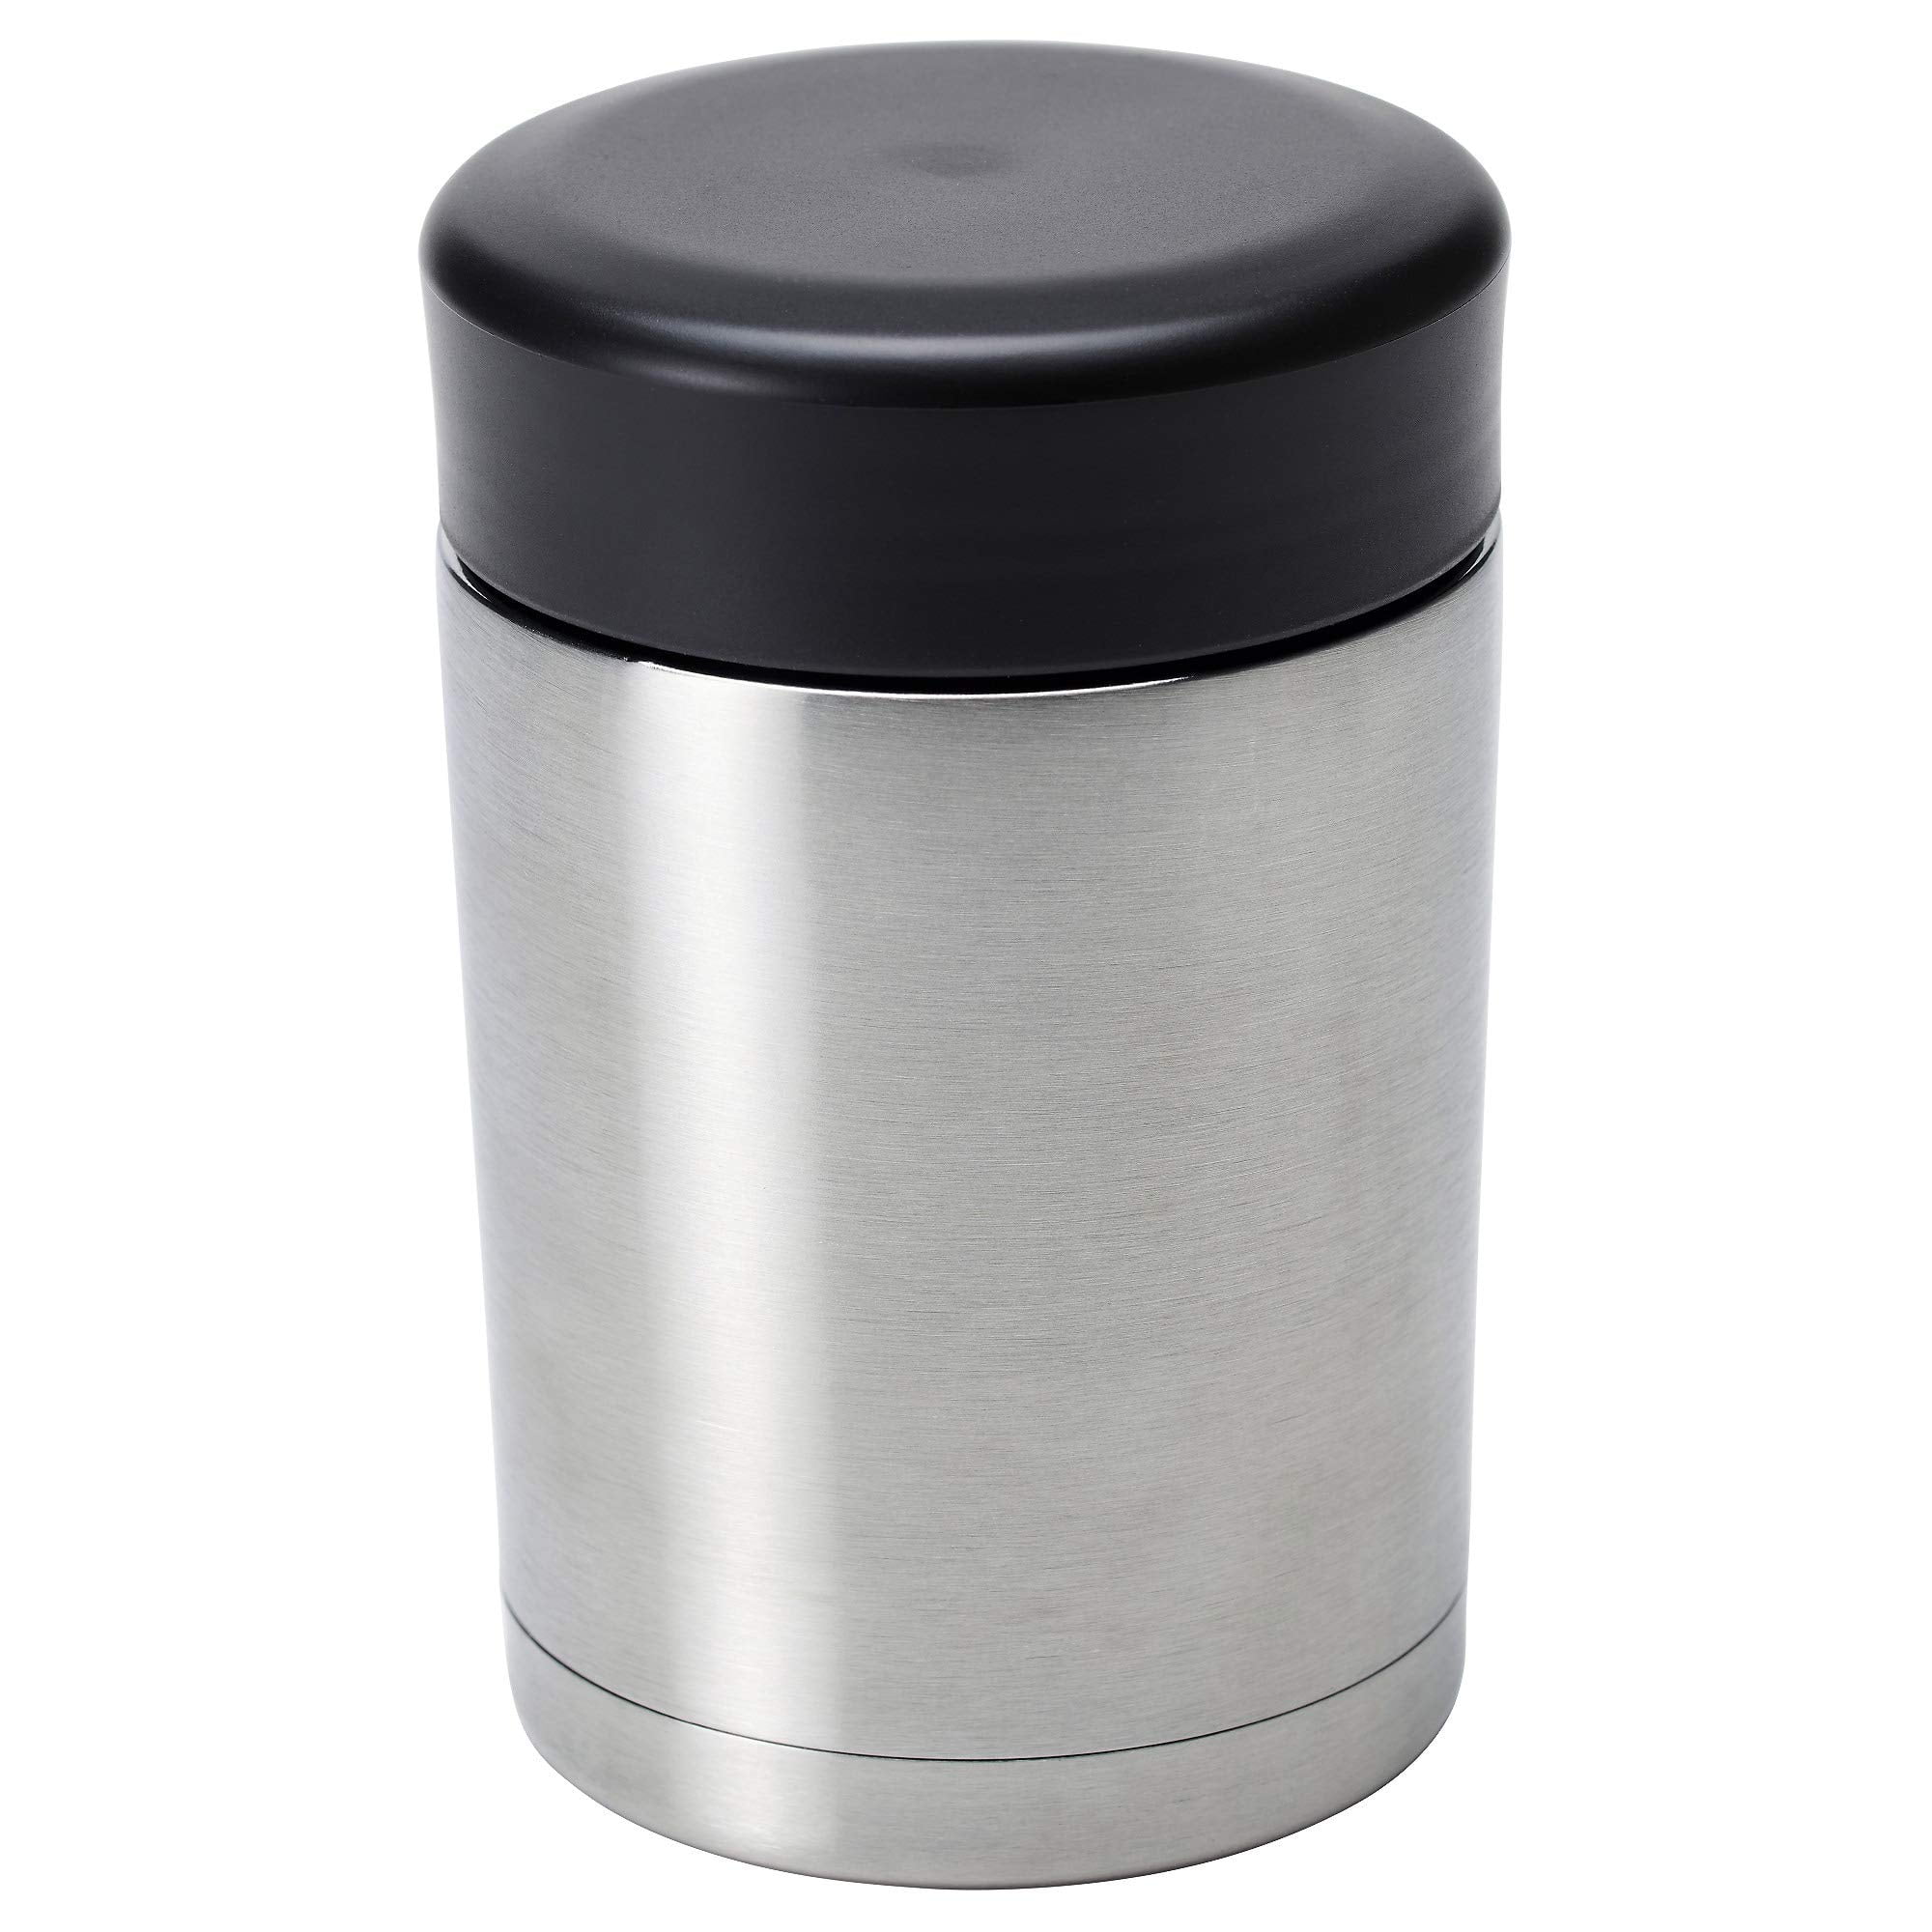 GRUNDTAL Container, stainless steel, 4 - IKEA